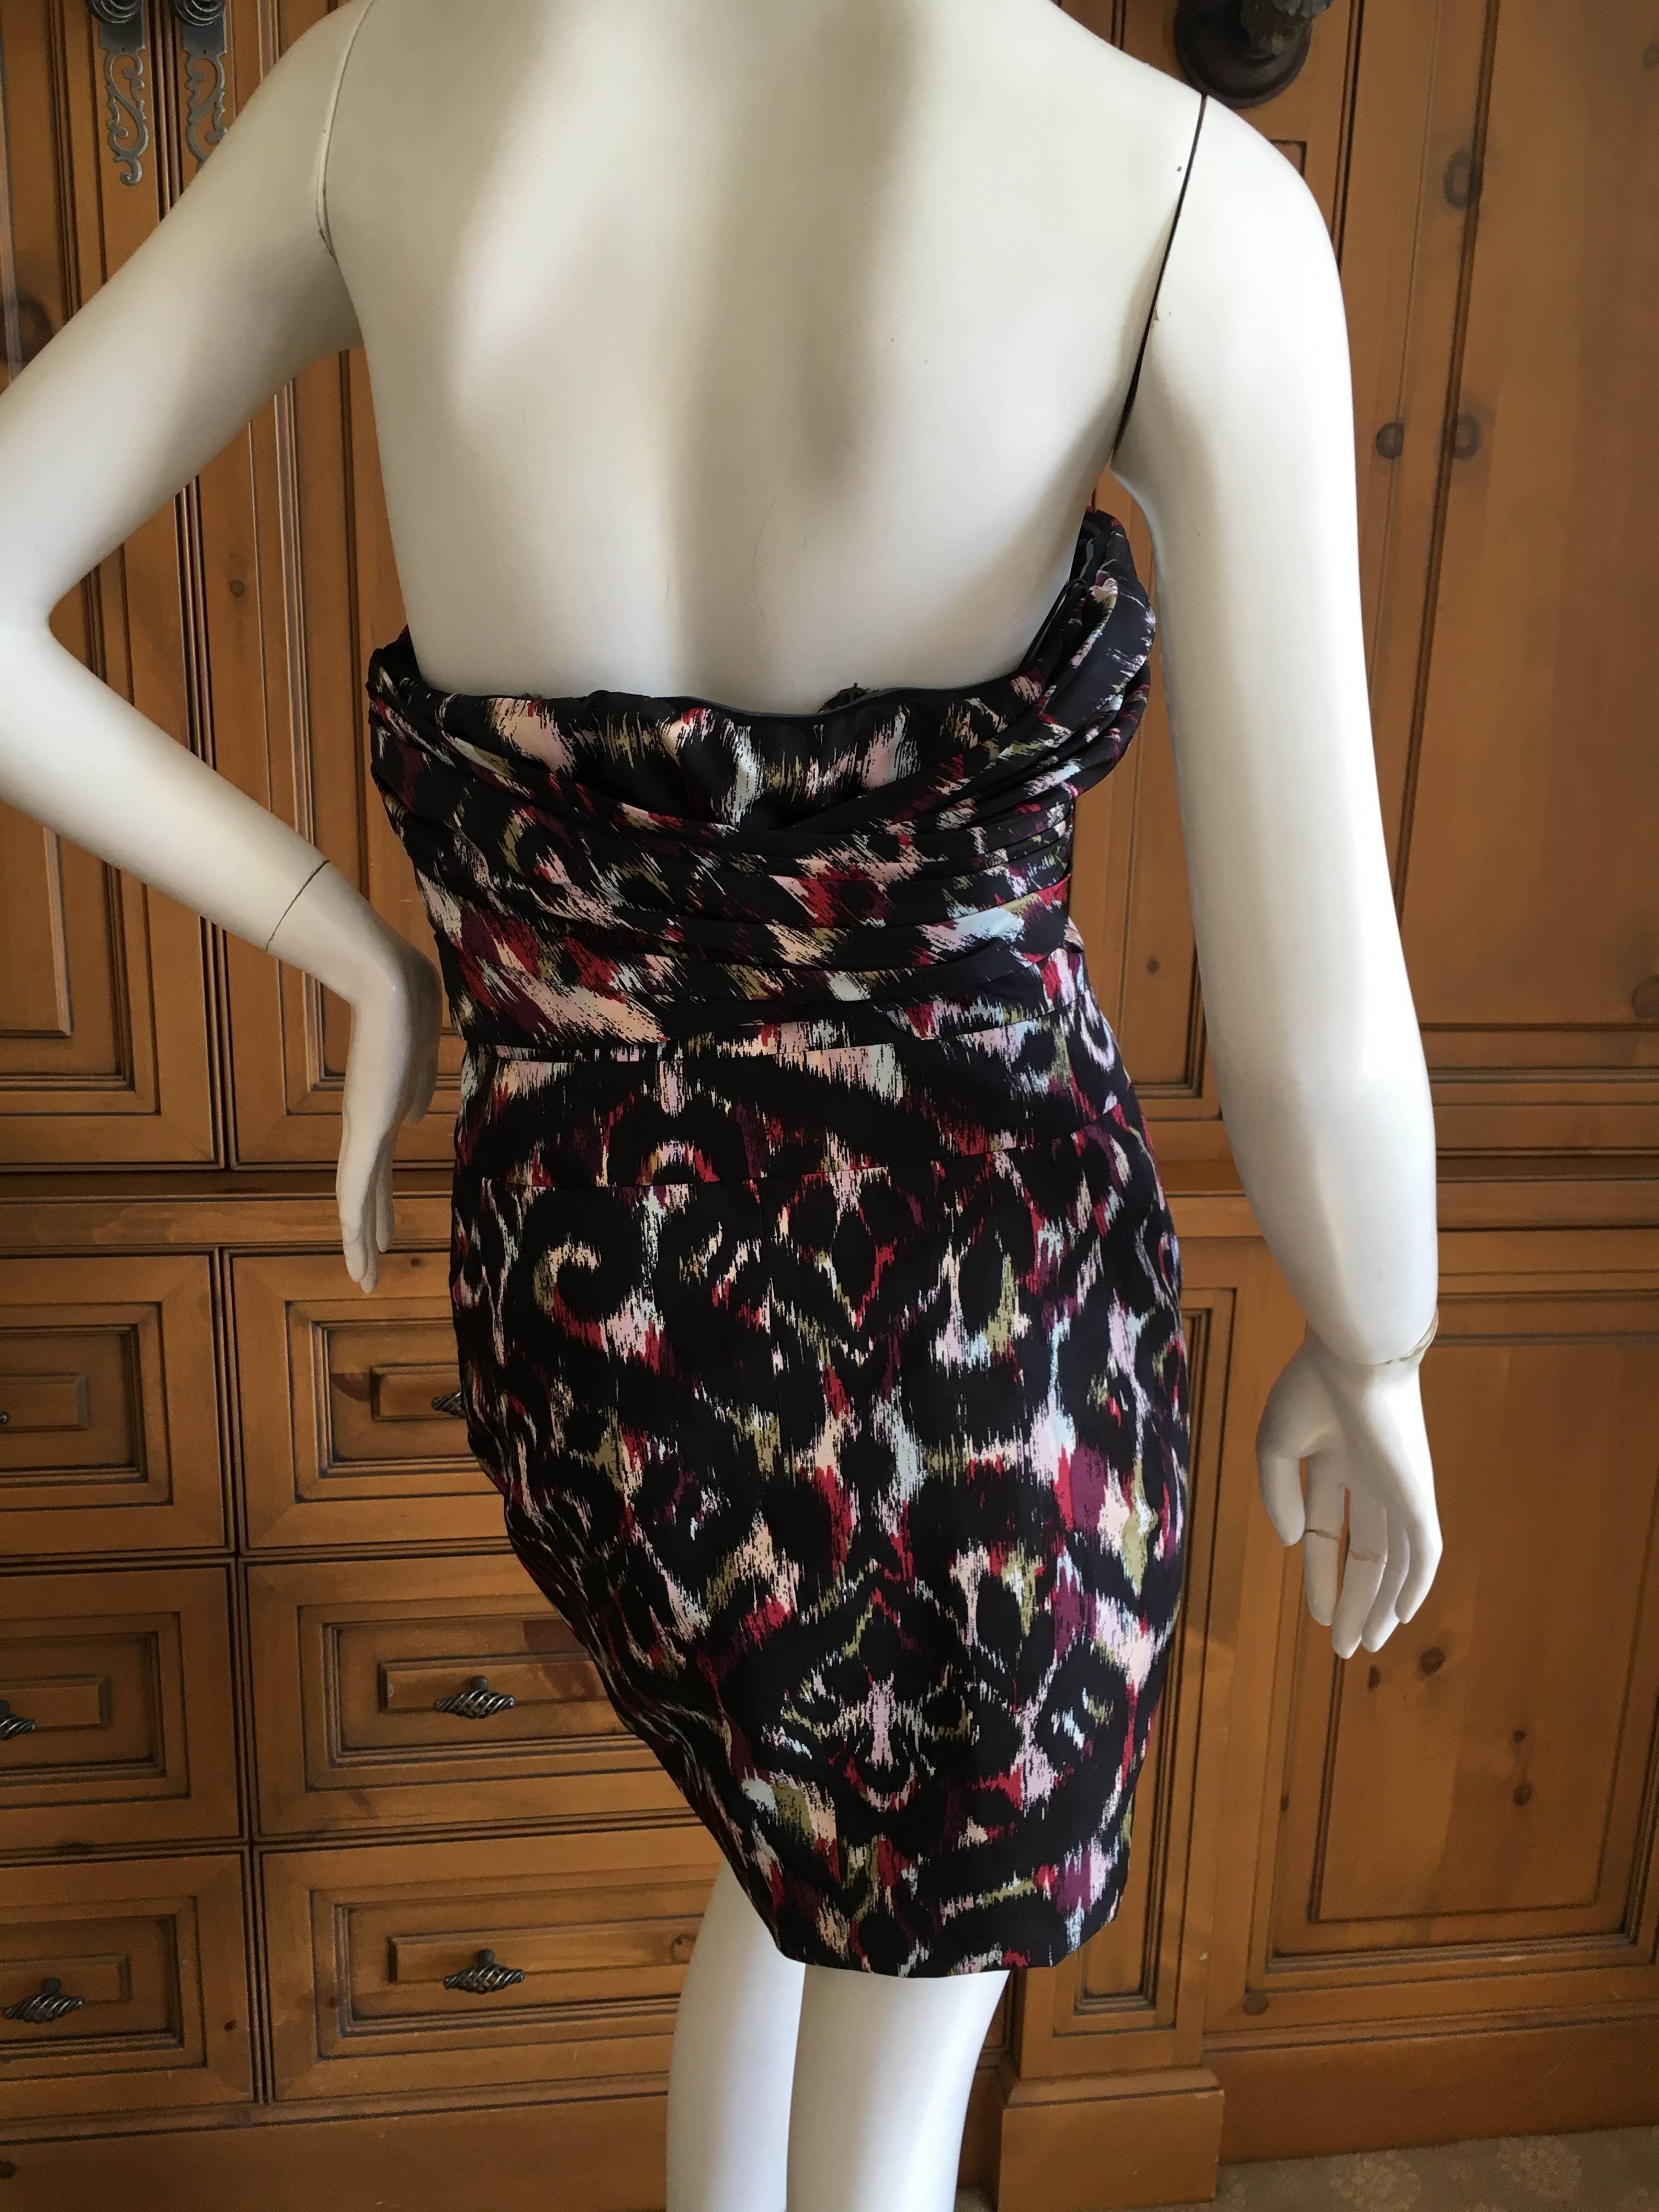 Christian Dior by Galliano Tribal Print Strapless Mini Dress w Inner Corset In Excellent Condition For Sale In Cloverdale, CA